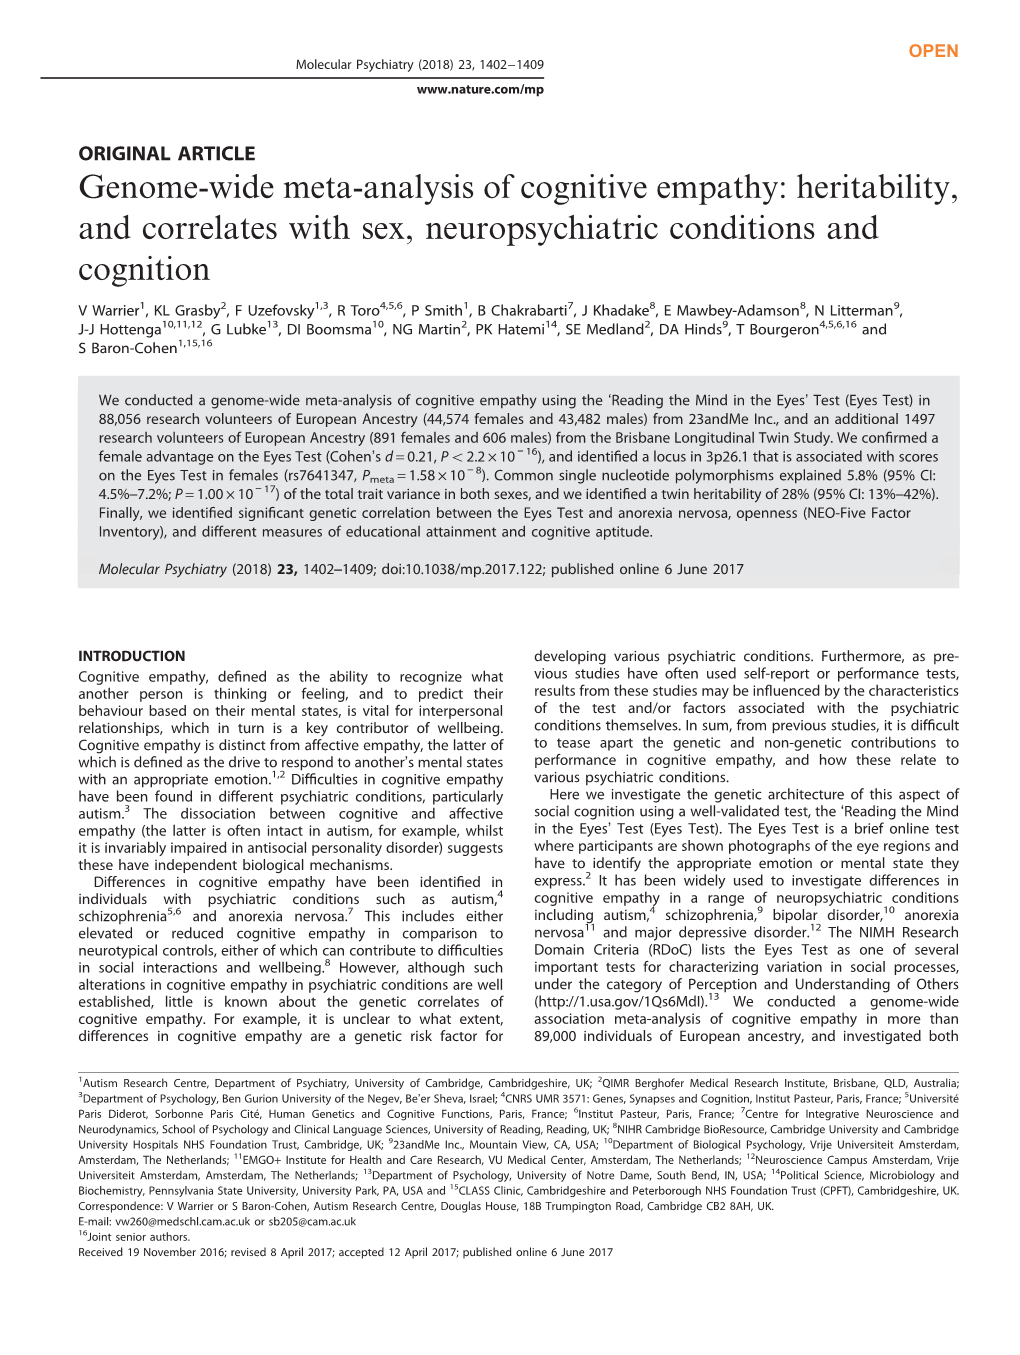 Genome-Wide Meta-Analysis of Cognitive Empathy: Heritability, and Correlates with Sex, Neuropsychiatric Conditions and Cognition